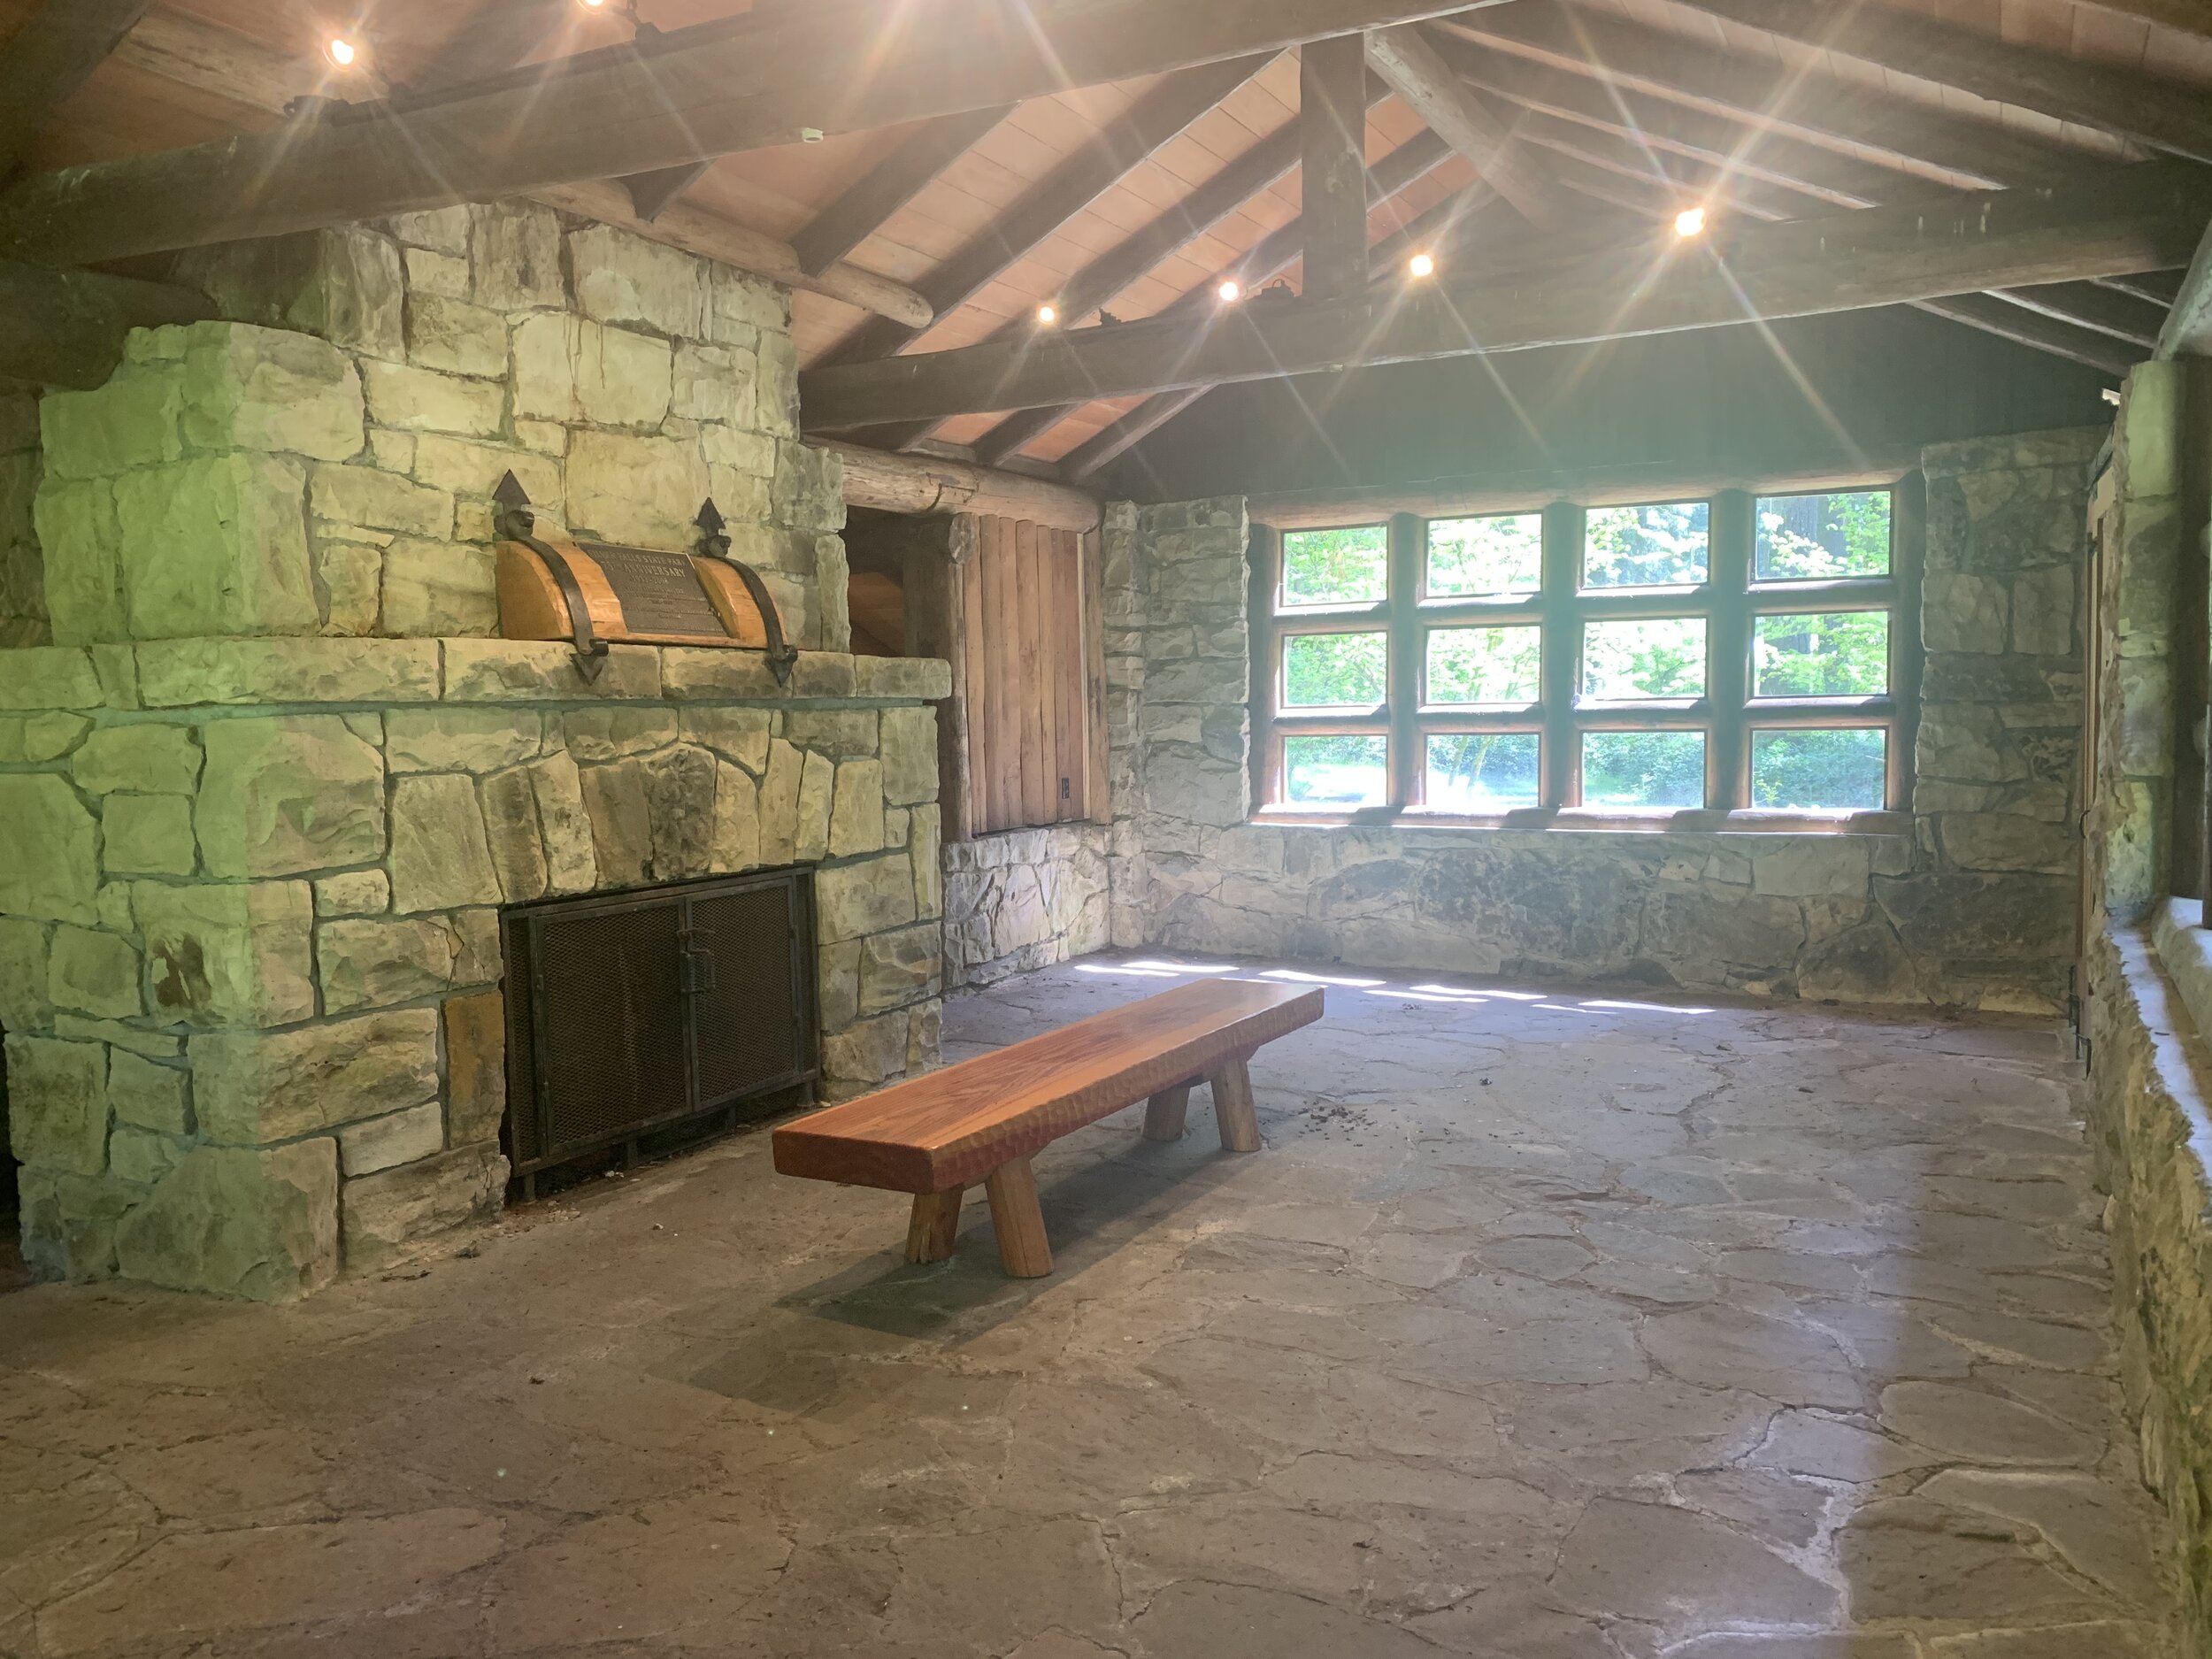  One of the most unique and underutilized buildings in the park, the Stone Kitchen Shelter will be a wonderful location to bring history to life.  